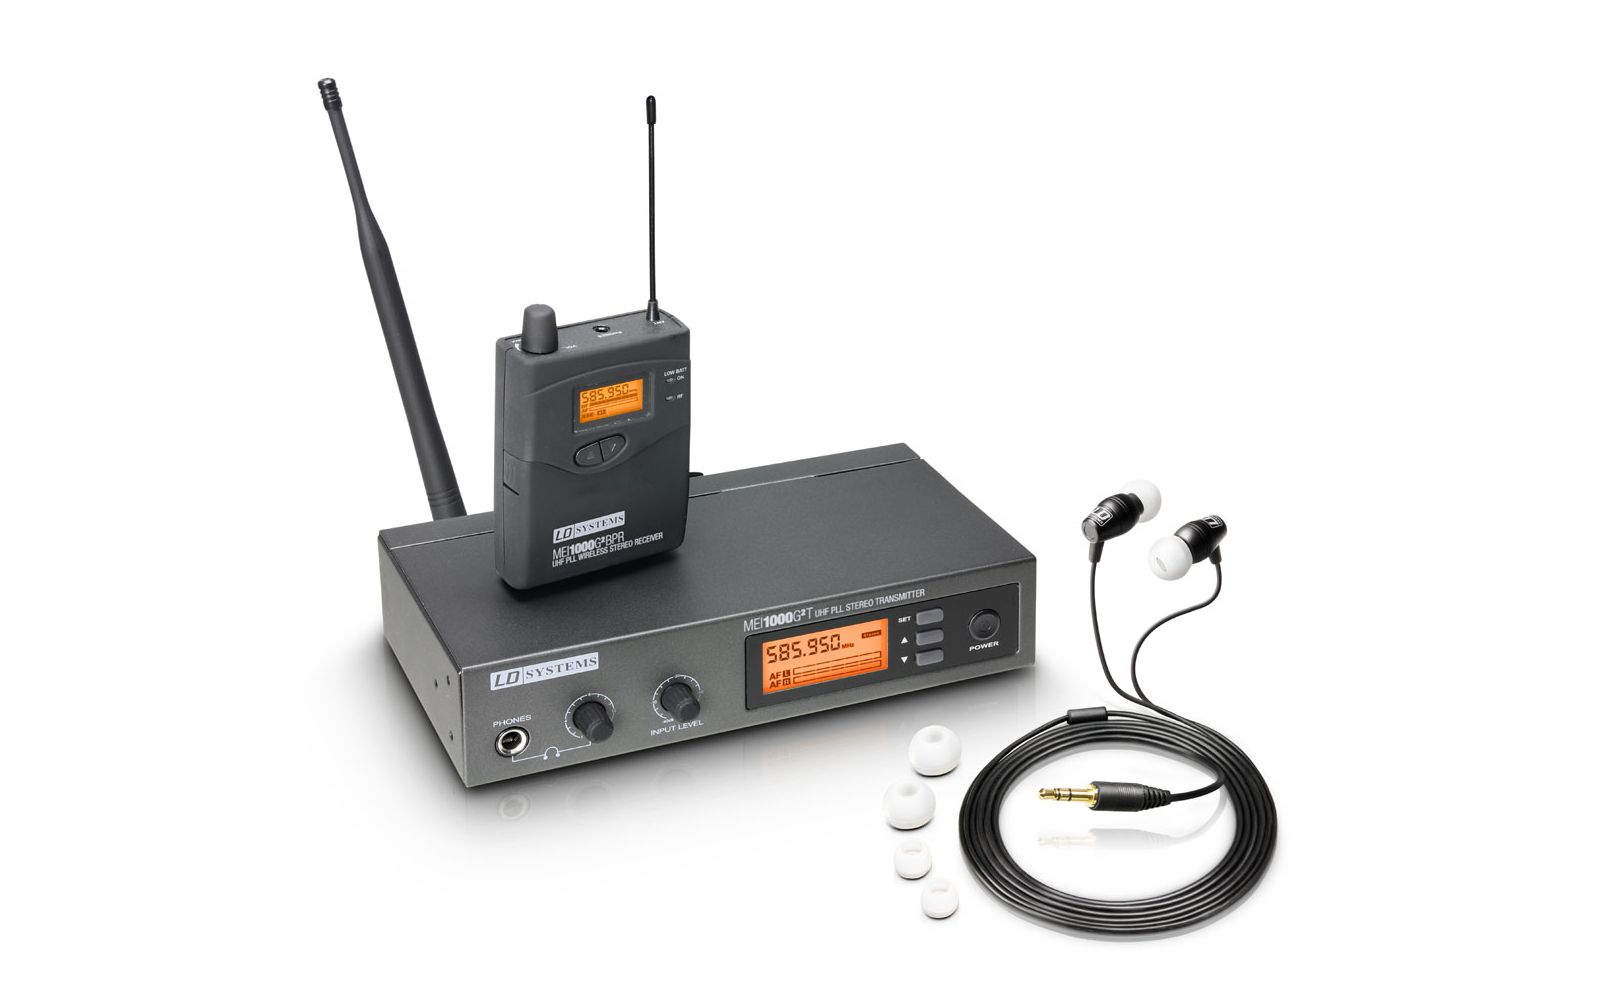 LD Systems MEI 1000 G2 In-Ear Monitoring System drahtlos B5 584 - 607 MHz von LD Systems